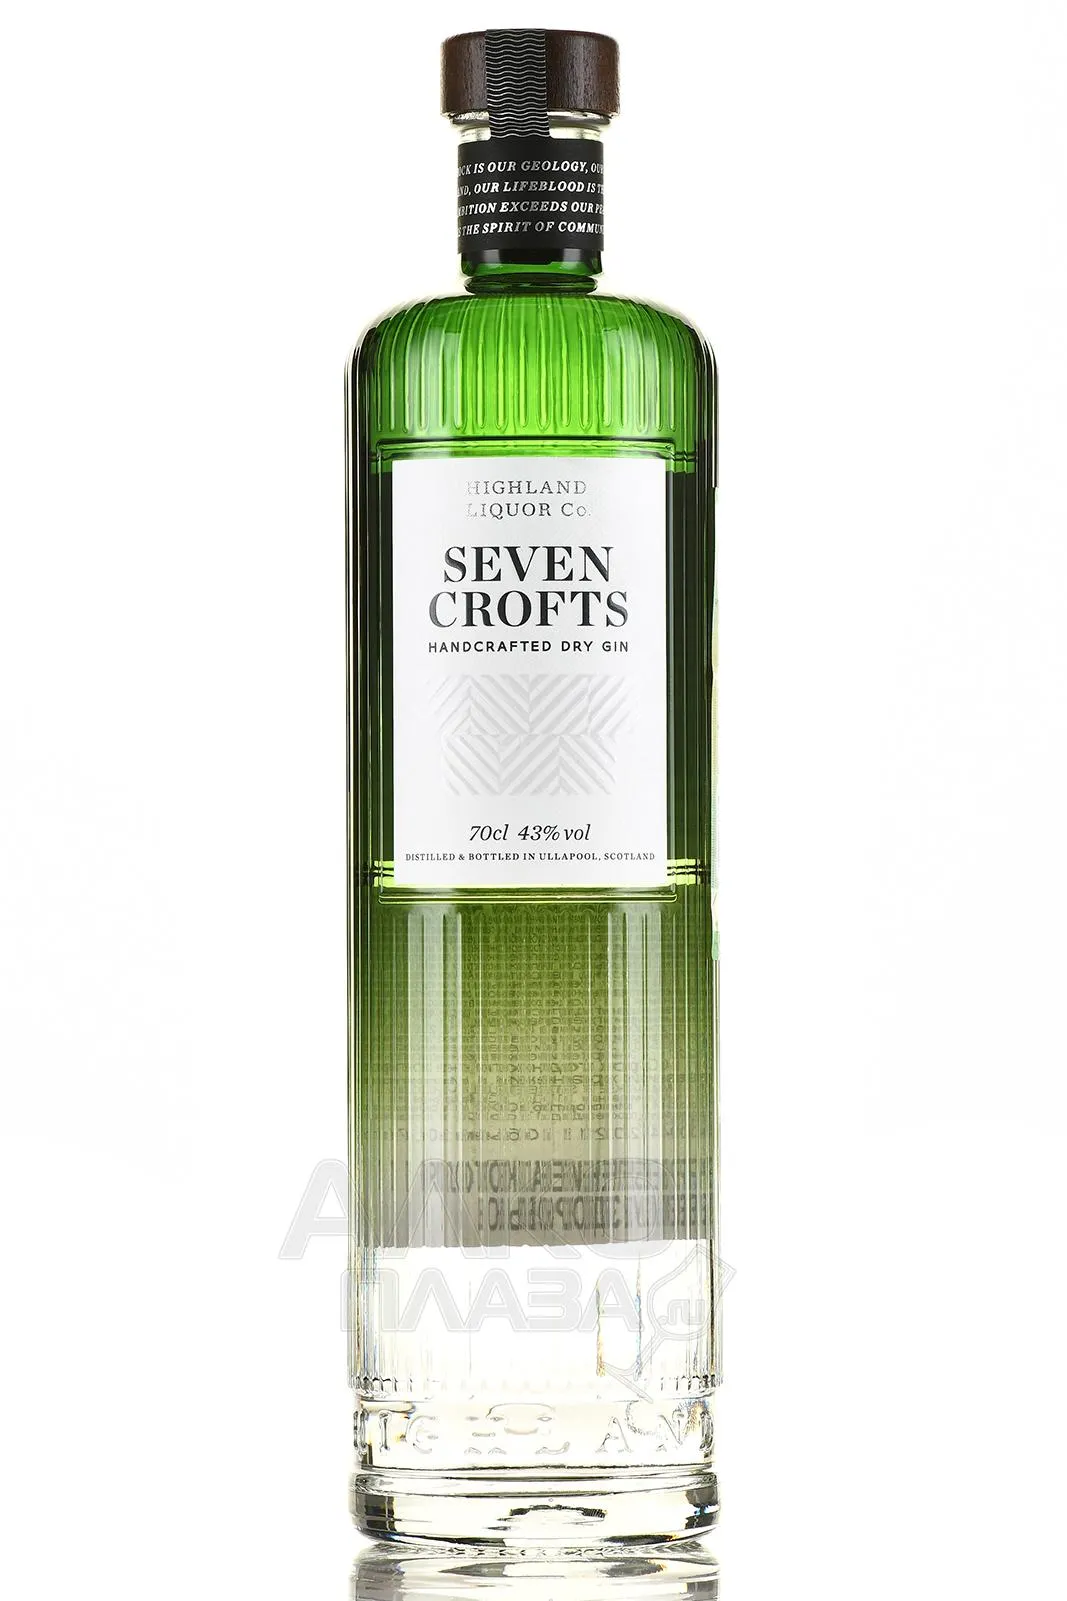 SEVEN CROFTS DRY GIN